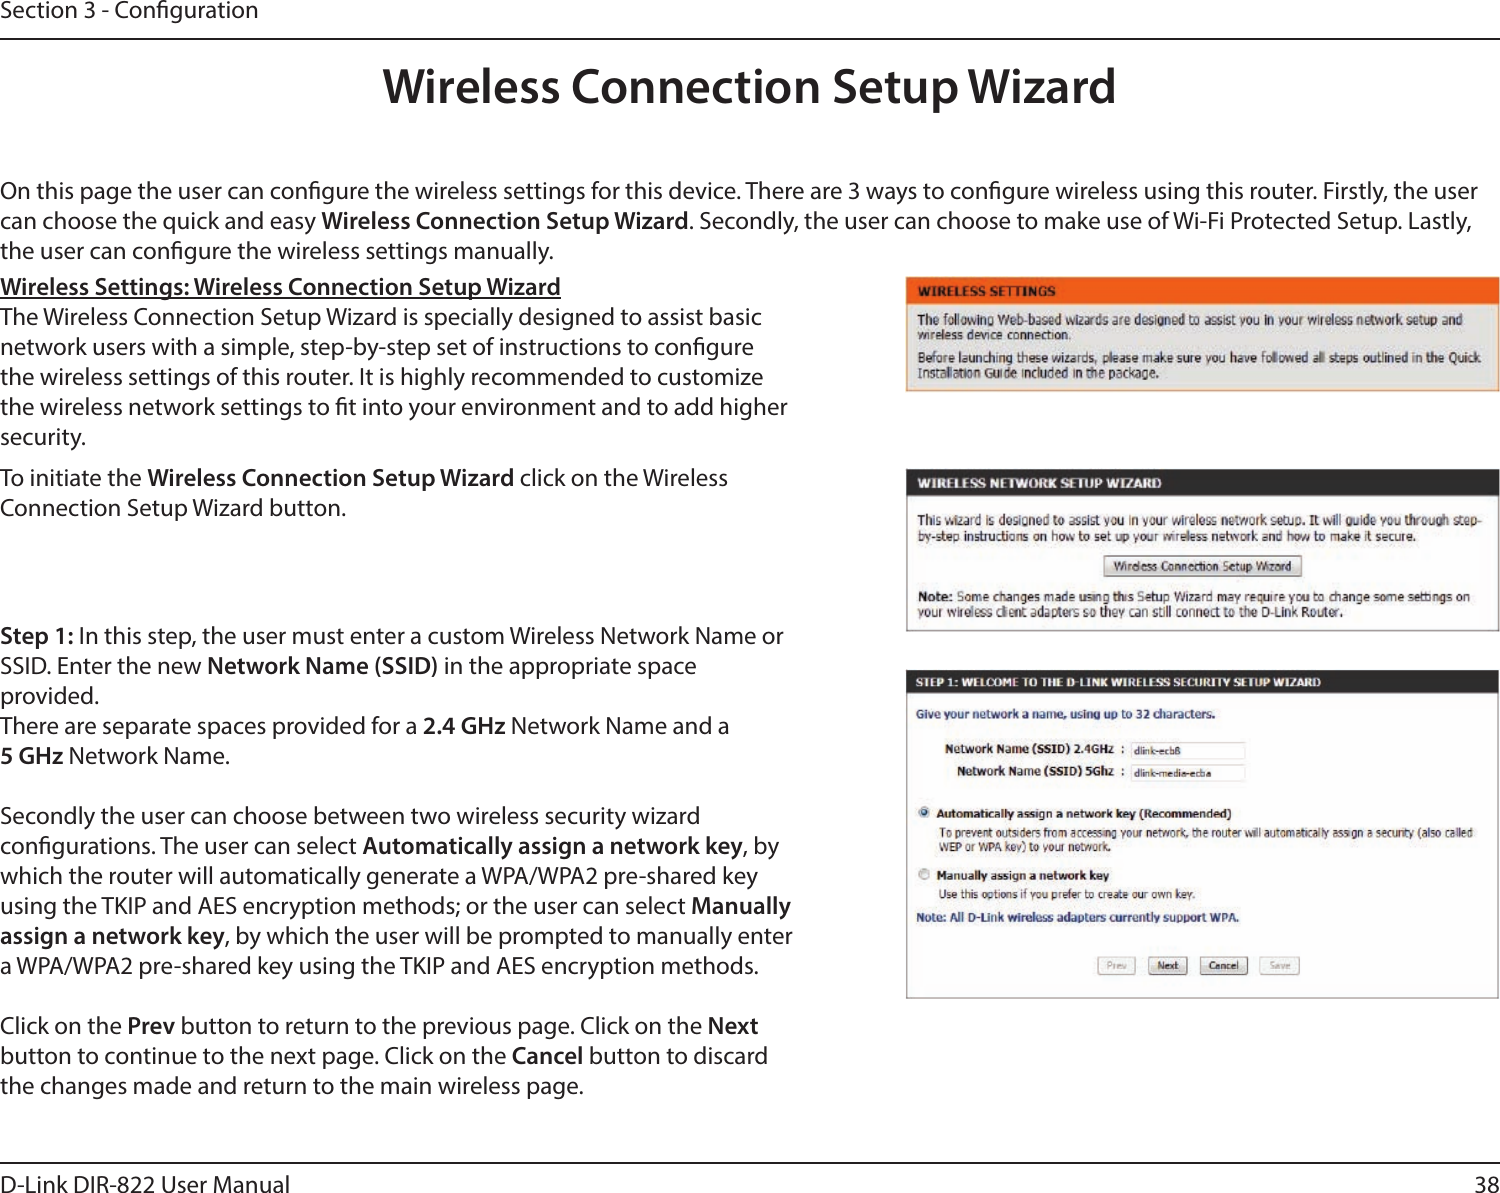 38D-Link DIR-822 User ManualSection 3 - CongurationOn this page the user can congure the wireless settings for this device. There are 3 ways to congure wireless using this router. Firstly, the user can choose the quick and easy Wireless Connection Setup Wizard. Secondly, the user can choose to make use of Wi-Fi Protected Setup. Lastly, the user can congure the wireless settings manually.Wireless Settings: Wireless Connection Setup WizardThe Wireless Connection Setup Wizard is specially designed to assist basic network users with a simple, step-by-step set of instructions to congure the wireless settings of this router. It is highly recommended to customize the wireless network settings to t into your environment and to add higher security.Step 1: In this step, the user must enter a custom Wireless Network Name or SSID. Enter the new Network Name (SSID) in the appropriate space  provided. There are separate spaces provided for a 2.4 GHz Network Name and a  5 GHz Network Name.Secondly the user can choose between two wireless security wizard  congurations. The user can select Automatically assign a network key, by which the router will automatically generate a WPA/WPA2 pre-shared key using the TKIP and AES encryption methods; or the user can select Manually assign a network key, by which the user will be prompted to manually enter a WPA/WPA2 pre-shared key using the TKIP and AES encryption methods.Click on the Prev button to return to the previous page. Click on the Next button to continue to the next page. Click on the Cancel button to discard the changes made and return to the main wireless page.To initiate the Wireless Connection Setup Wizard click on the Wireless  Connection Setup Wizard button.Wireless Connection Setup Wizard